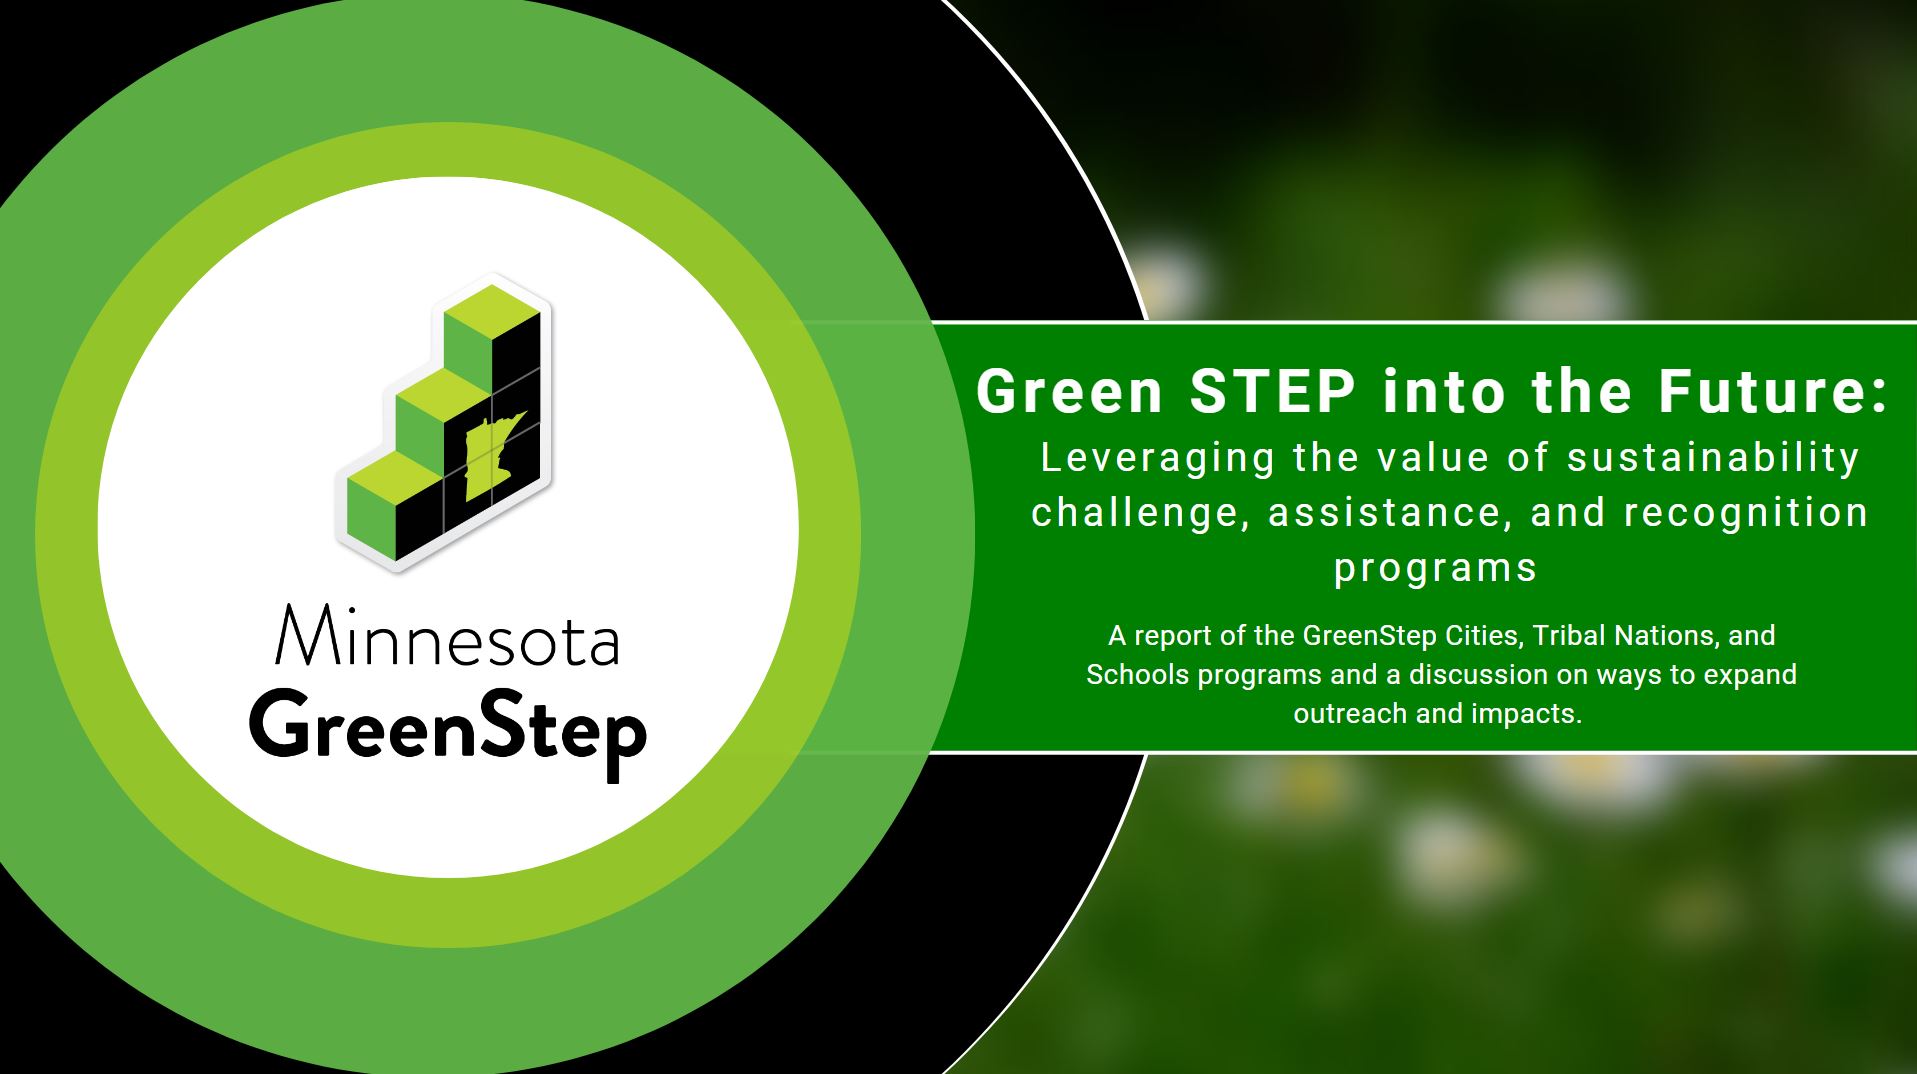 Green STEP into the Future: Leveraging the value of sustainability challenge, assistance, and recognition programs. A report of the GreenStep Cities, Tribal Nations, and Schools programs and a discussion on ways to expand outreach and impacts. 